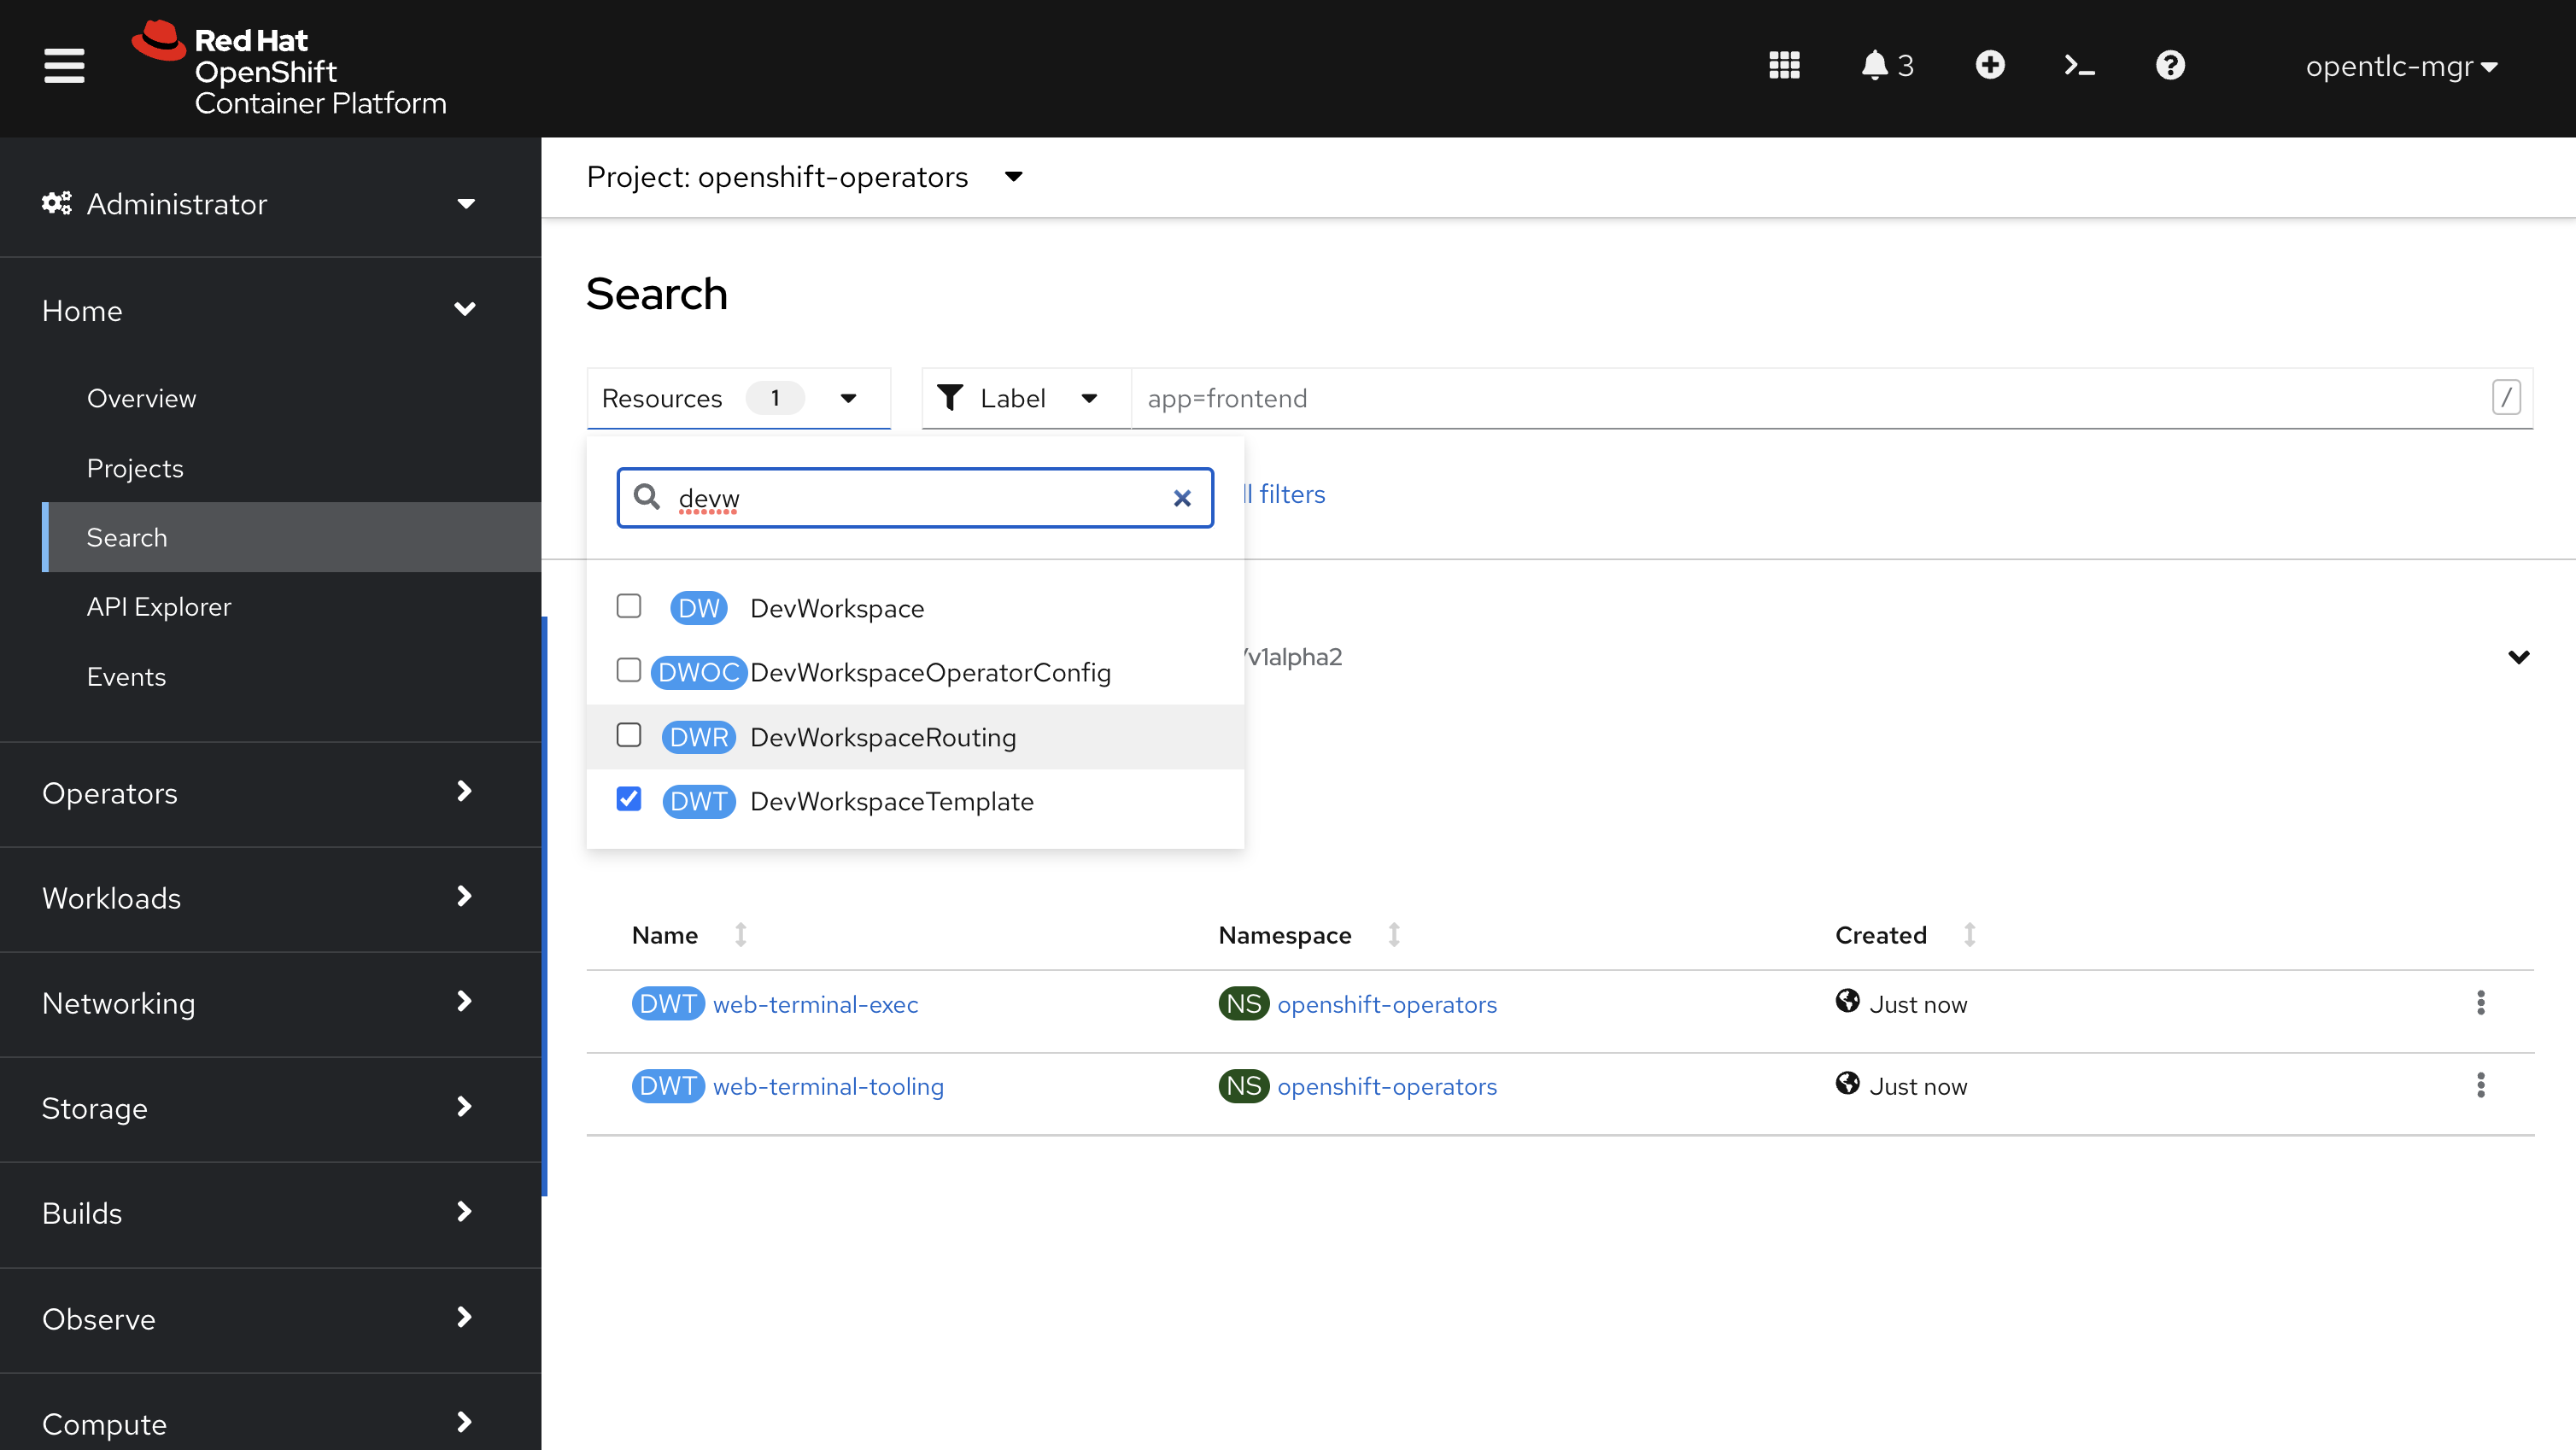 DevWorkspaceTemplate listing in the OpenShift Web Console